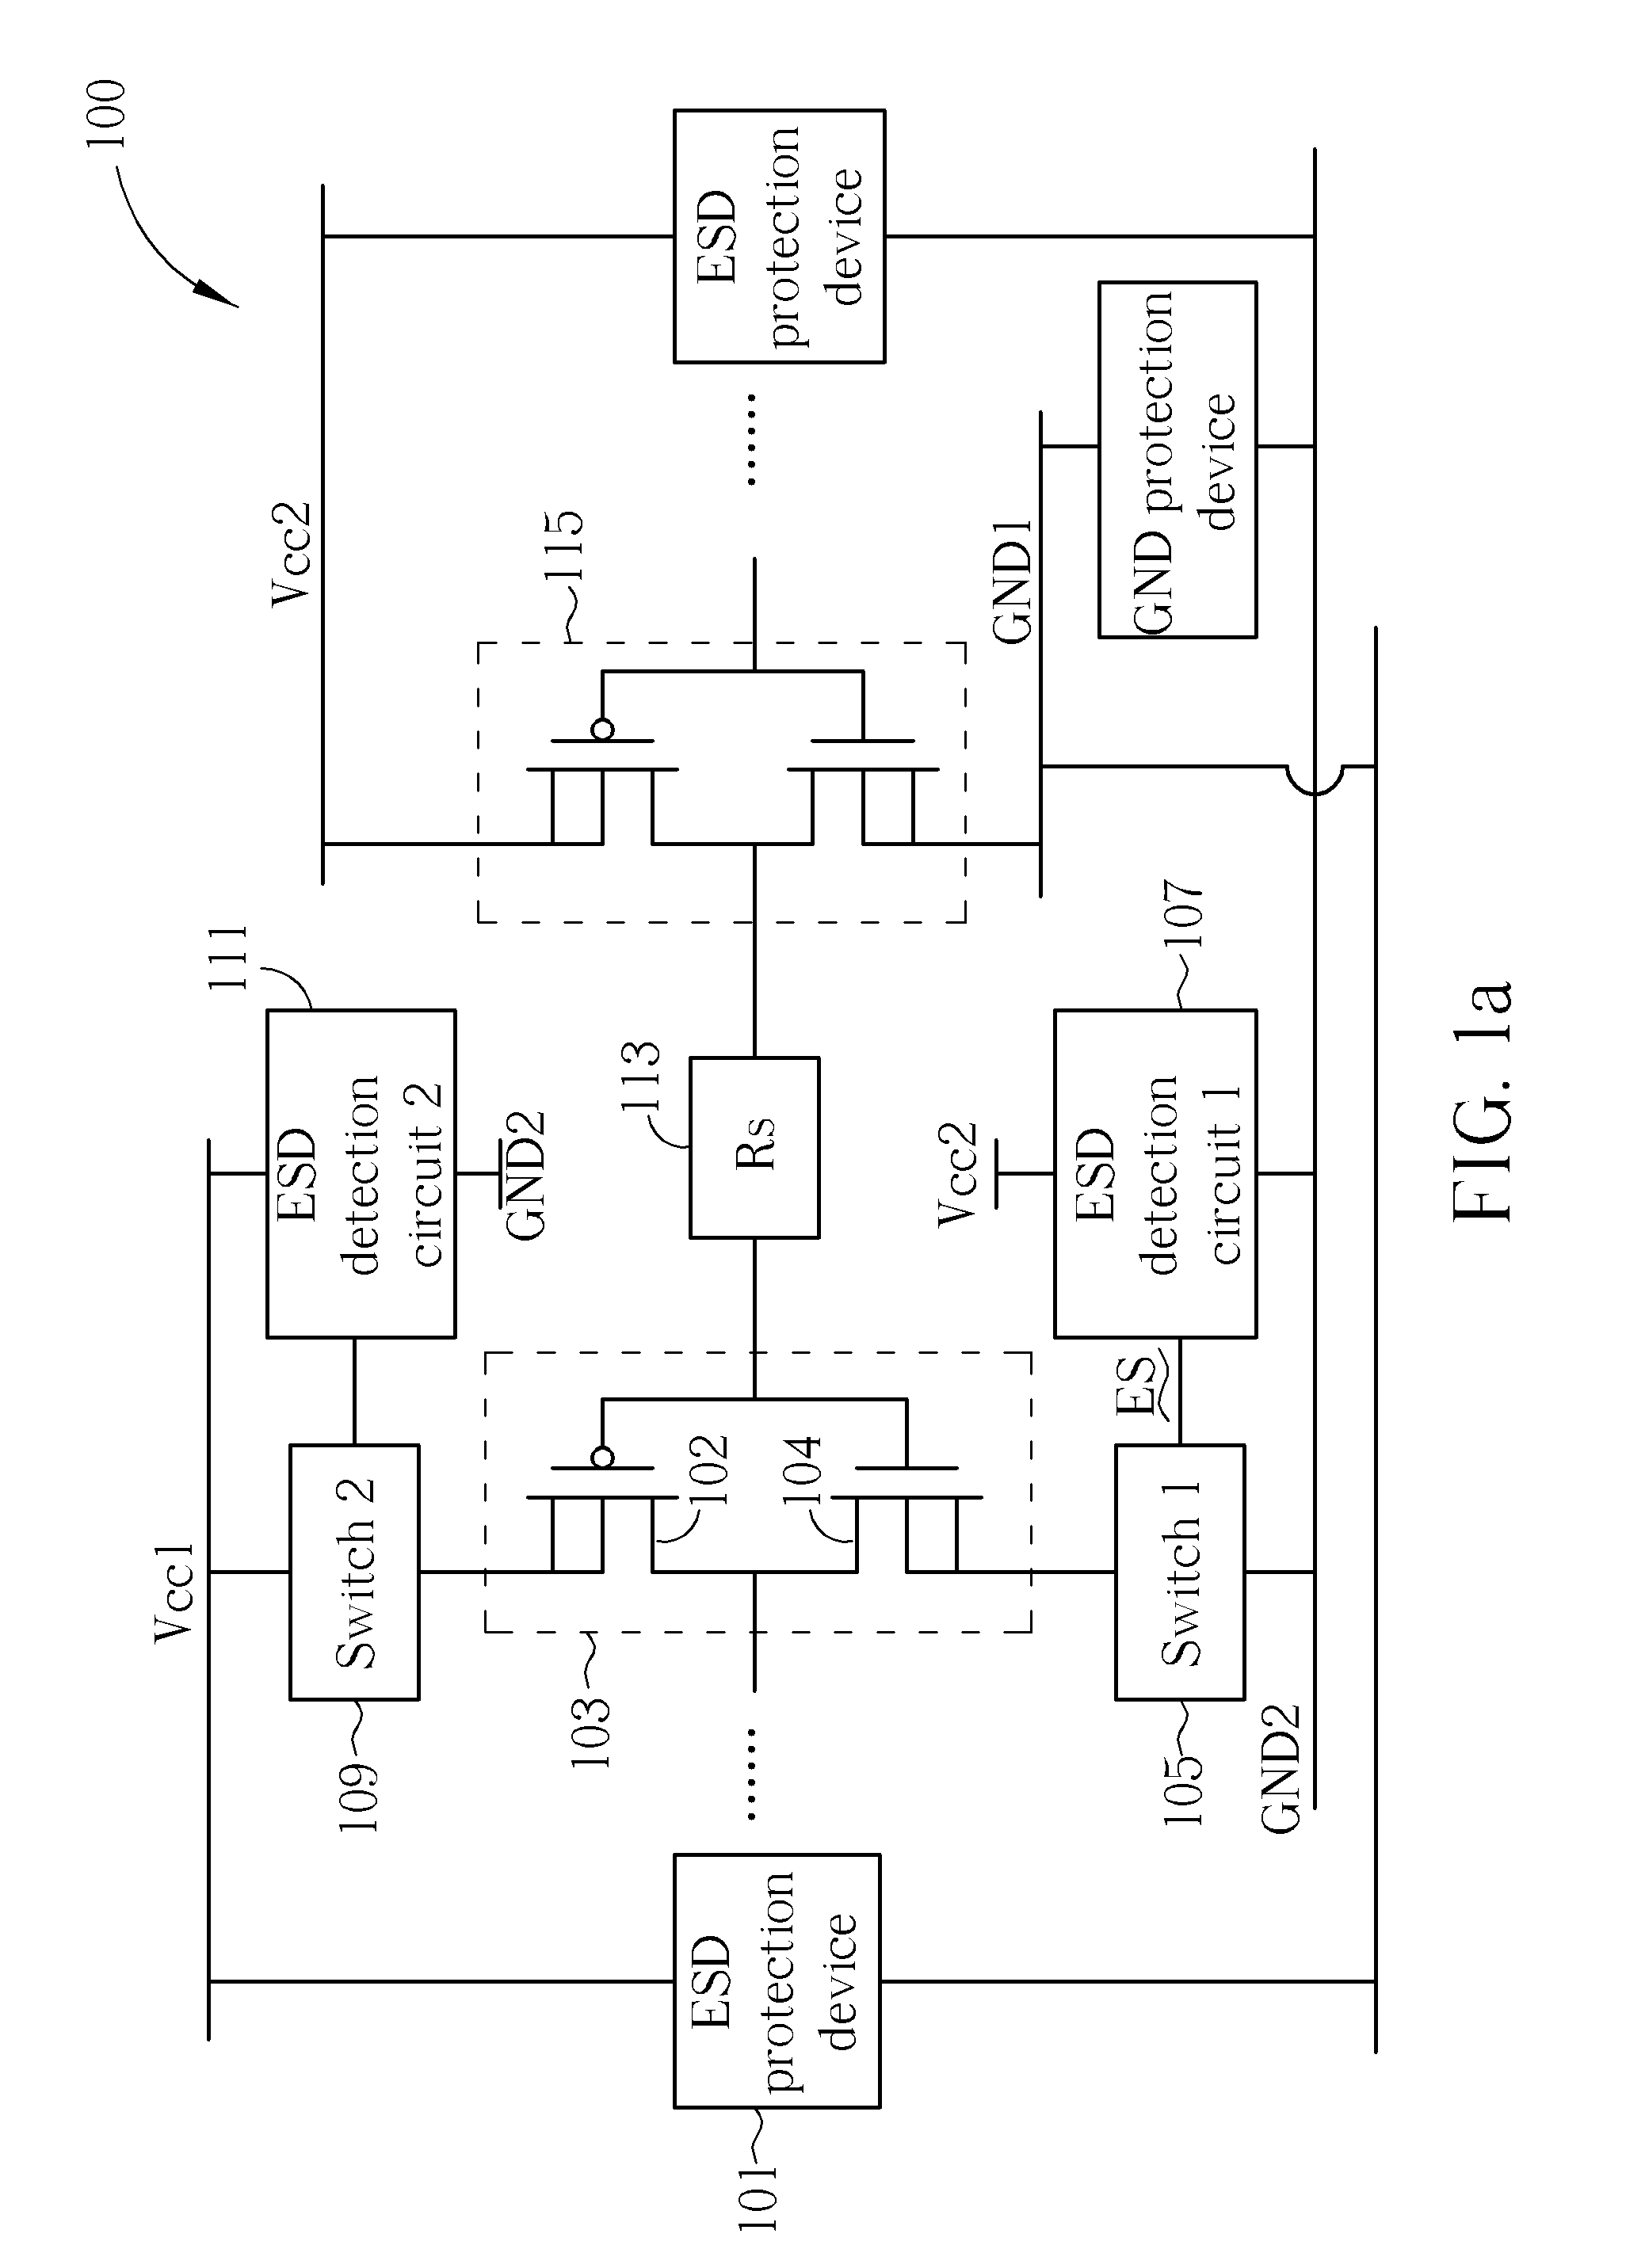 Electrostatic discharge circuit for integrated circuit with multiple power domain